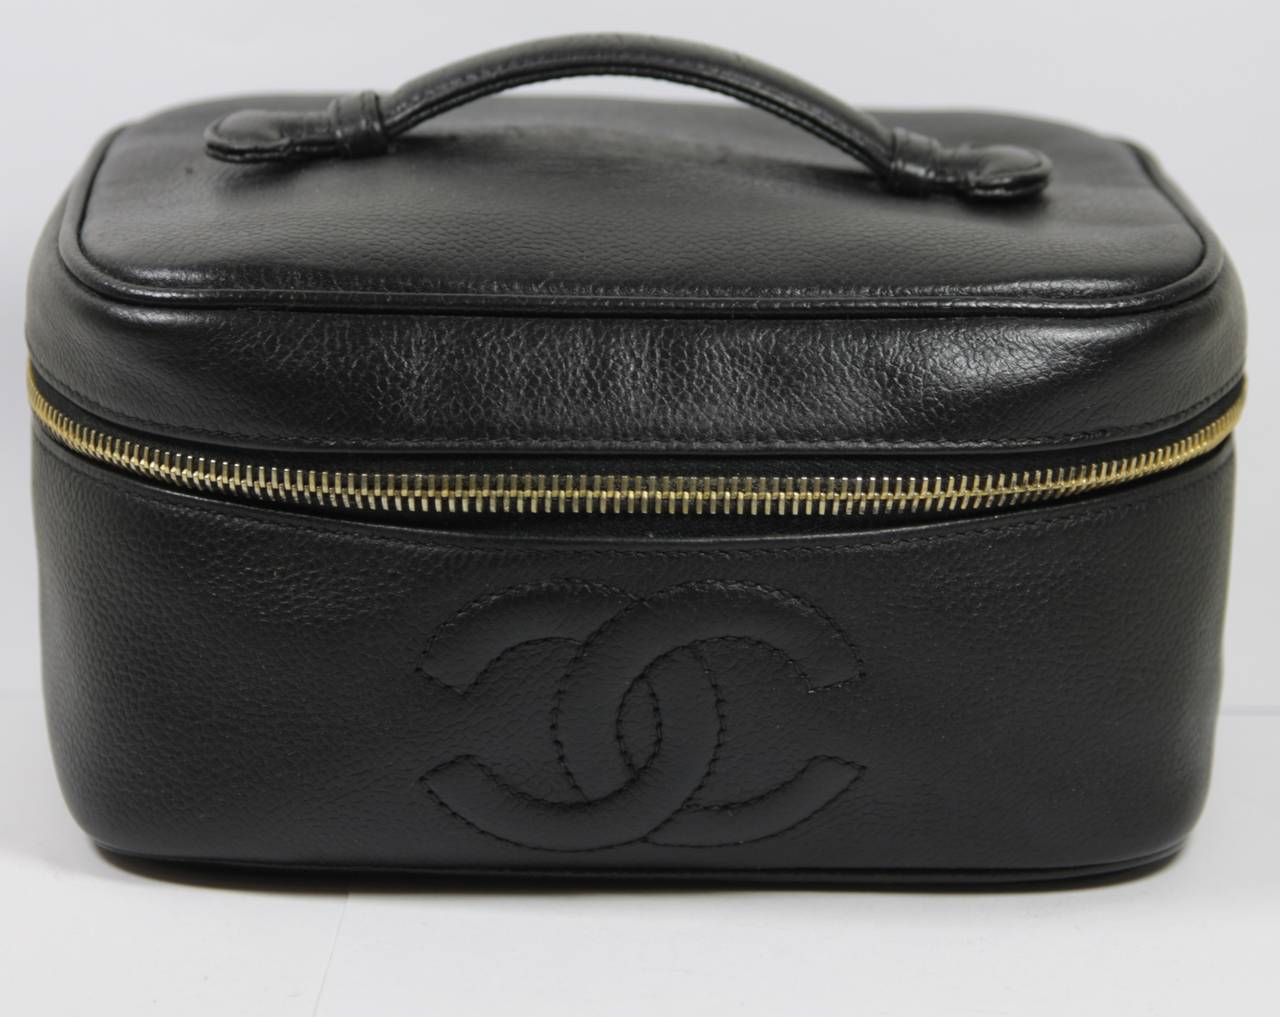 This Chanel cosmetic bag available for viewing at our Beverly Hills Boutique. We offer a large selection of evening gowns and luxury garments.

This make up bag is composed of a black Caviar leather. There is a top handle and zipper closure with a